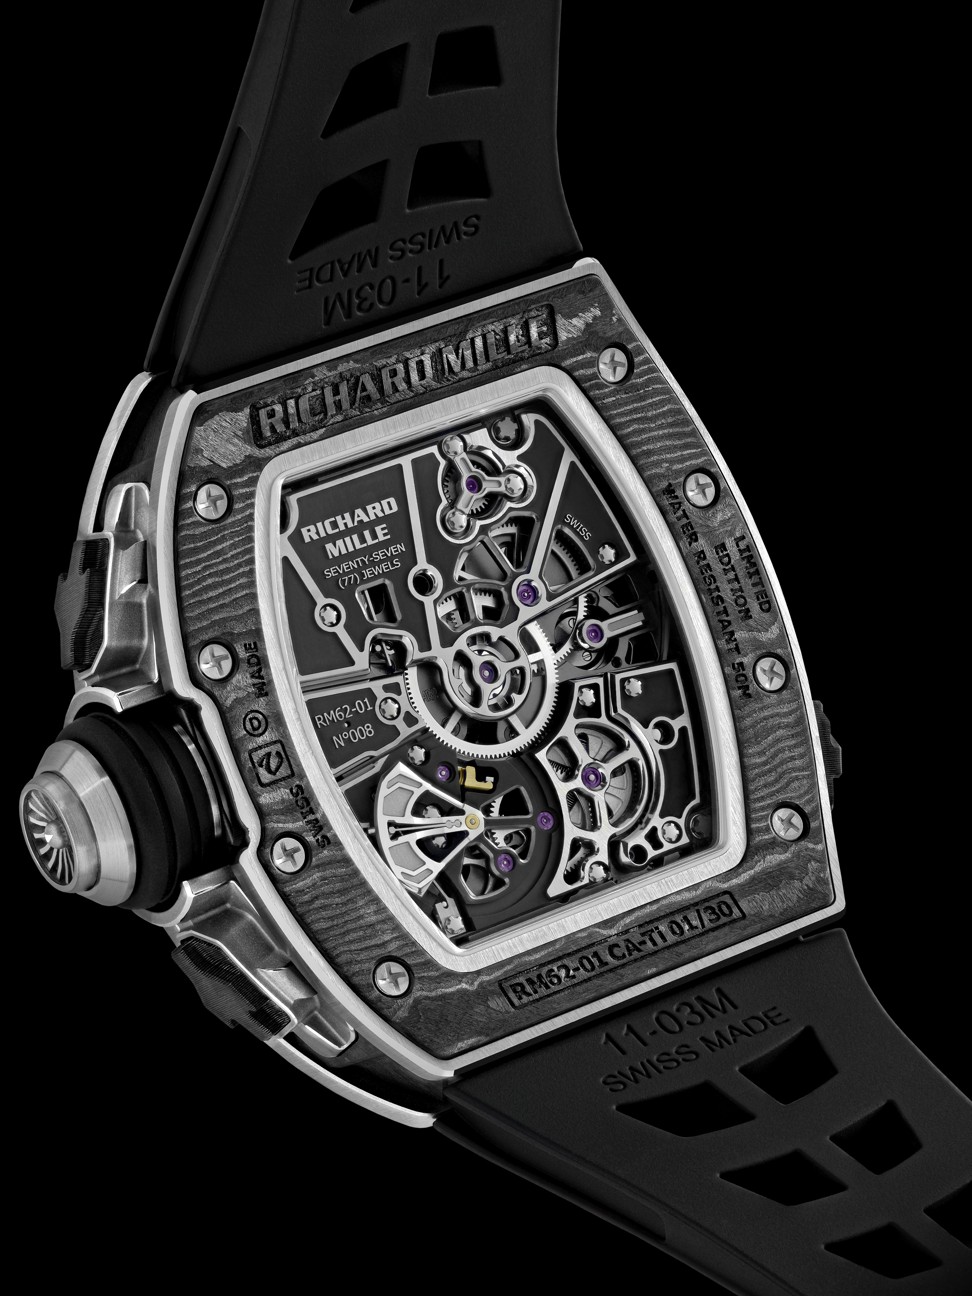 The RM 62-01 Manual Winding Tourbillon vibrating alarm ACJ by Richard Mille is an alarm watch designed to give a silent signal by a vibration.